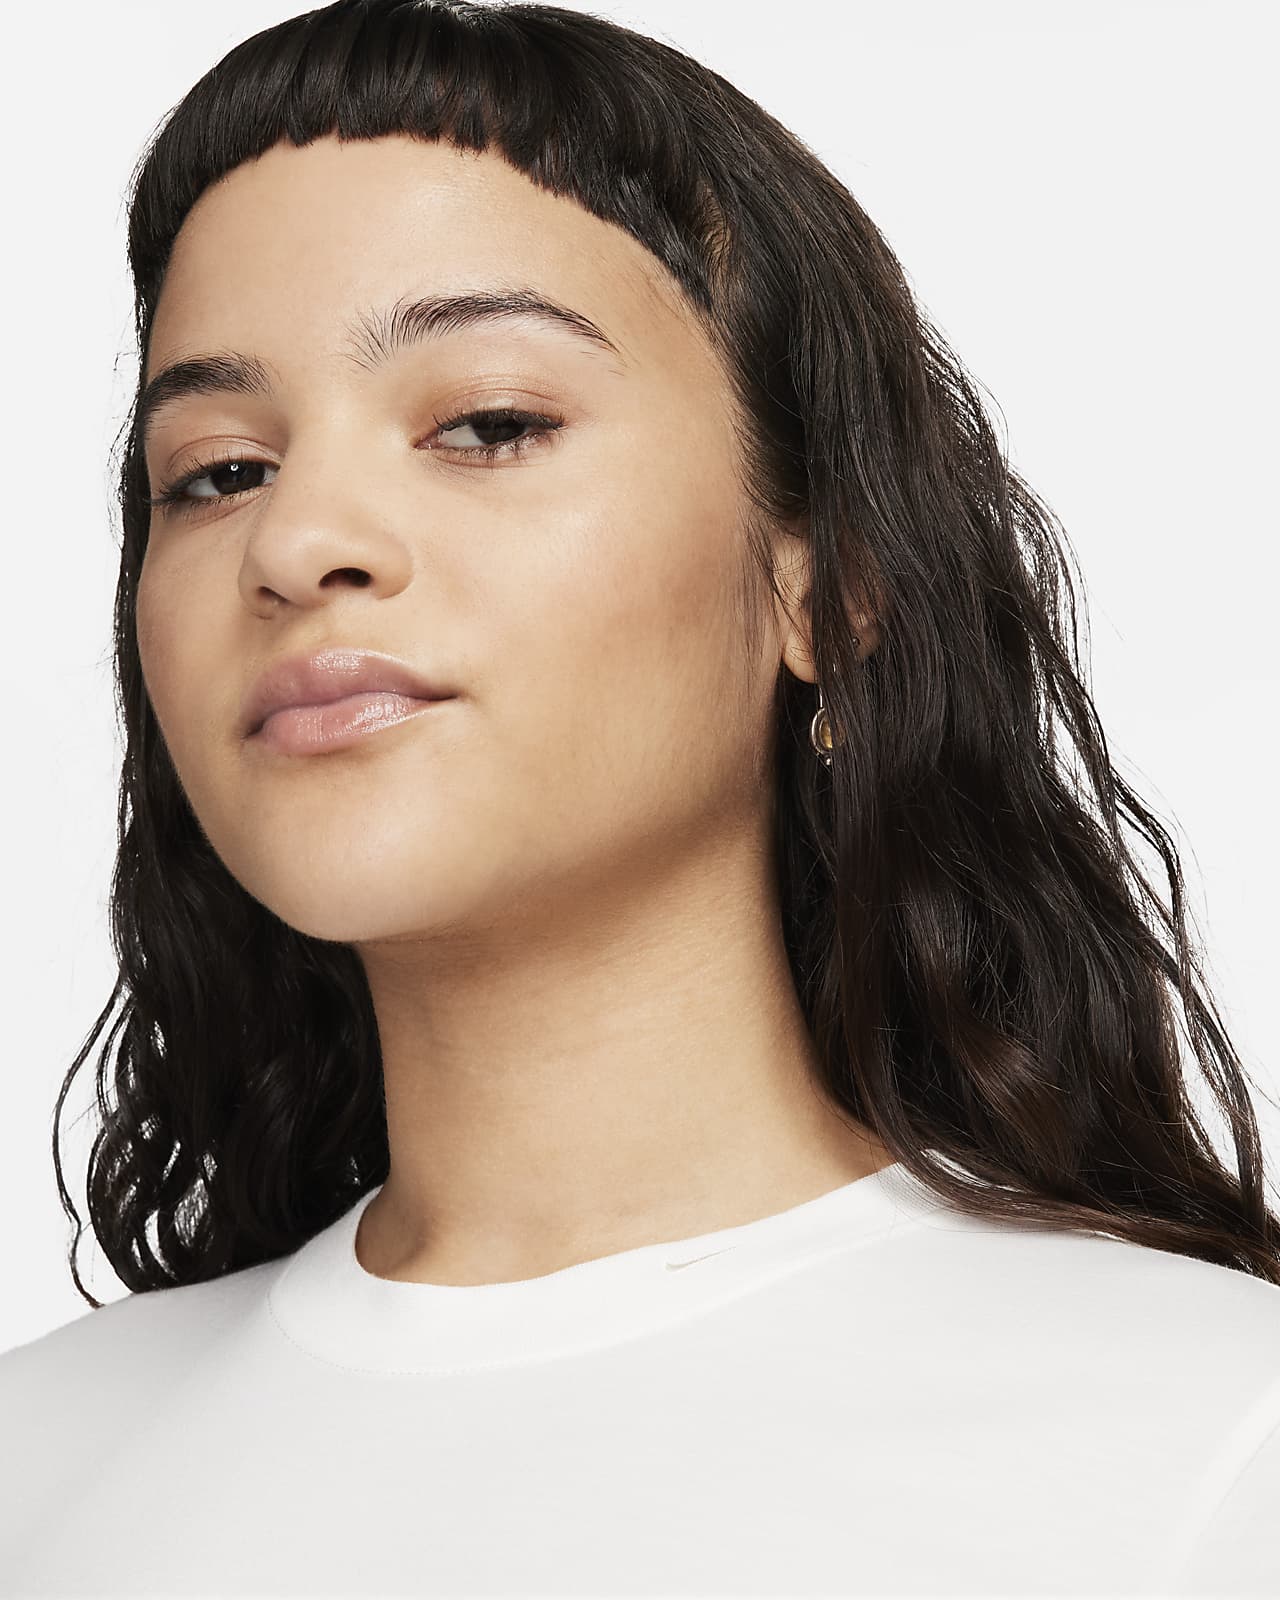 Nike Women's Essential Crop T-Shirt - BV6175-010 - SixtyTwo - SixtyTwo